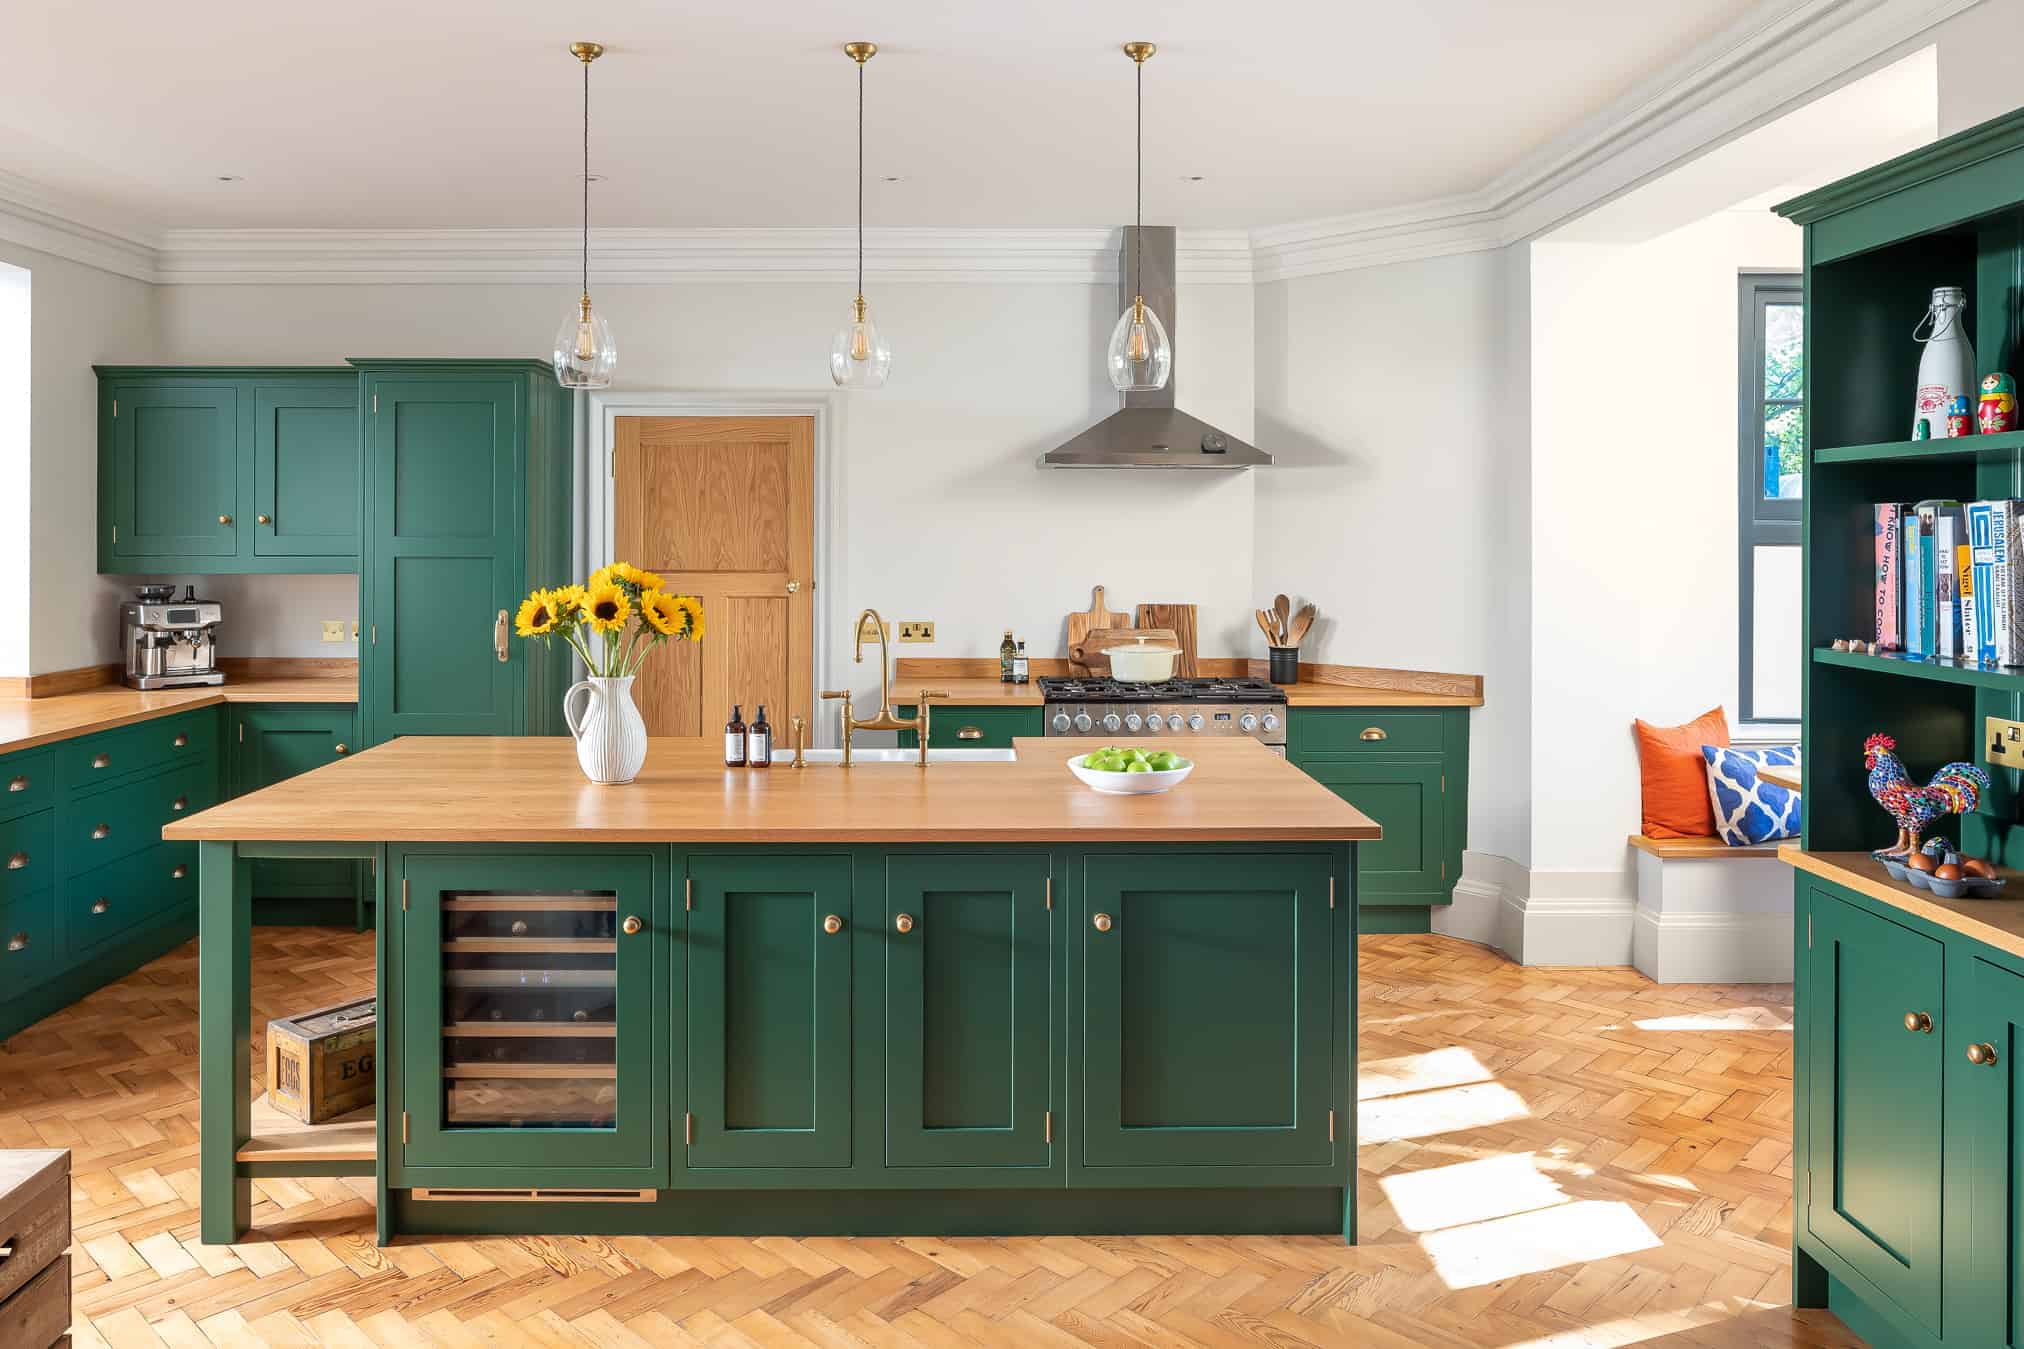 A colourful kitchen with green kitchen cabinets.